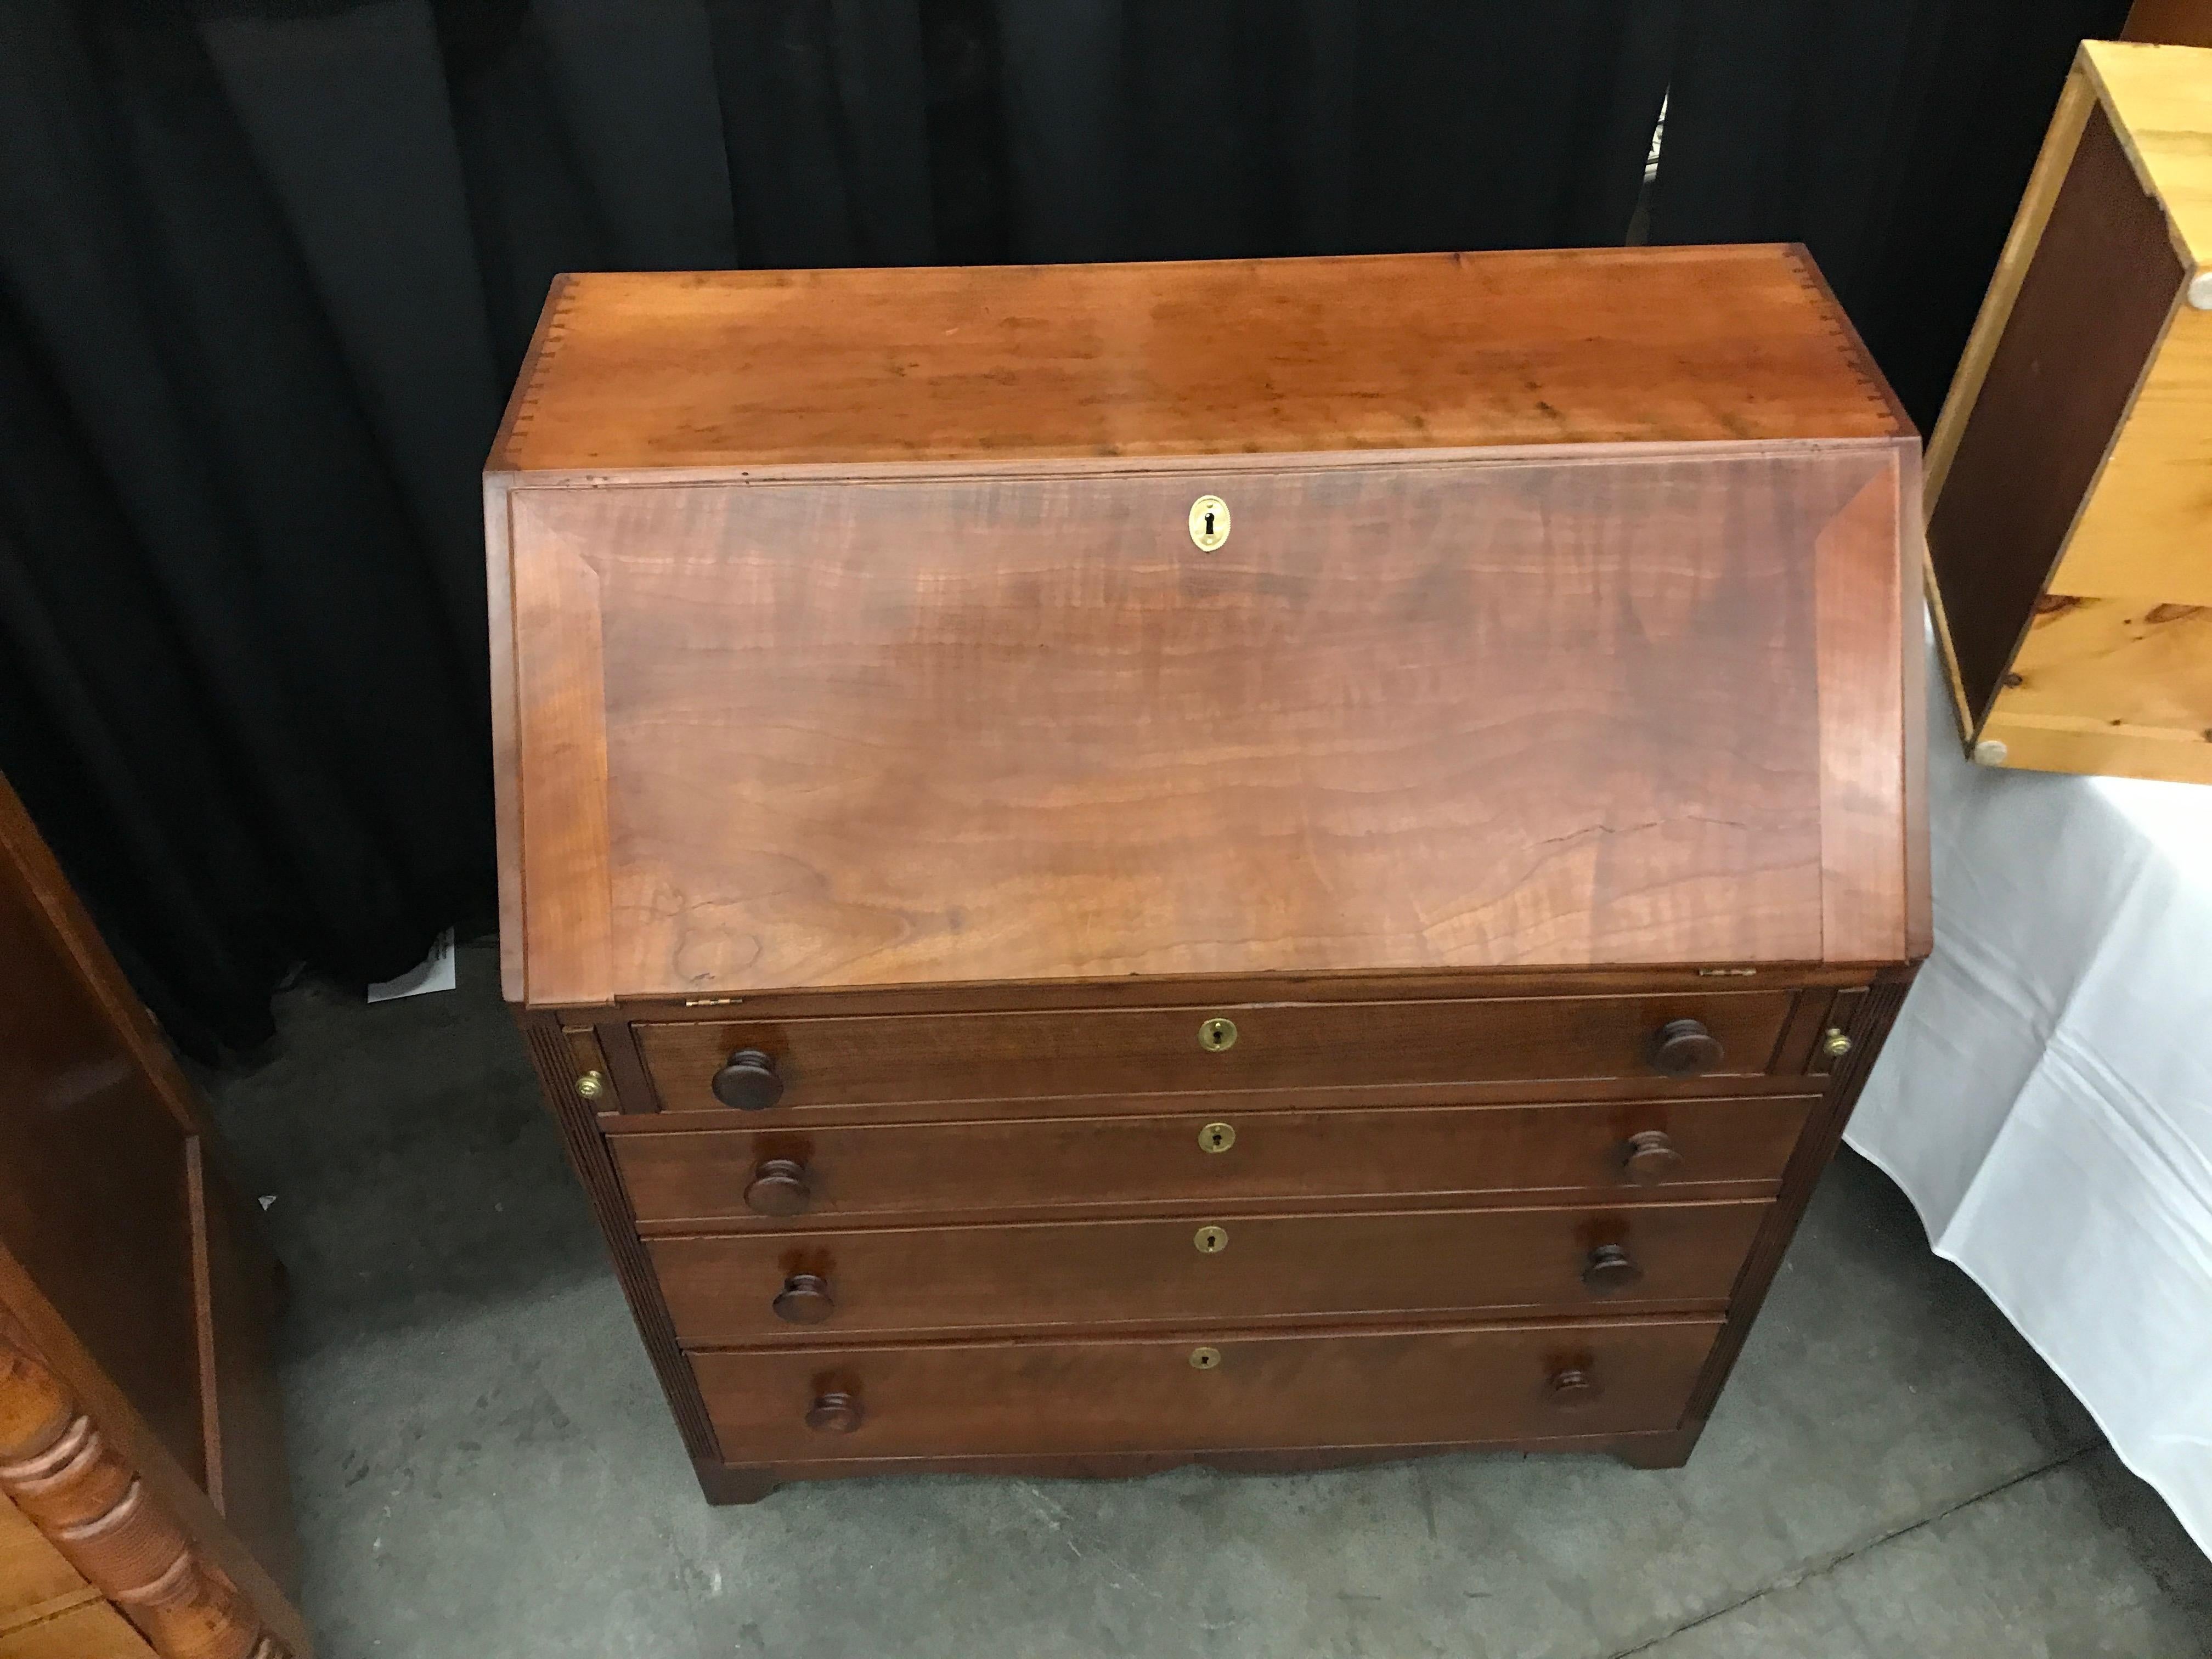 Slant front desk circa 1890 in Figured cherry with wooden knob pulls, brass escutcheons, dovetailed top, reeded borders and graduated drawers. Interior drawers are beautiful and function as they should. Pulls on the lid supports have lion heads on